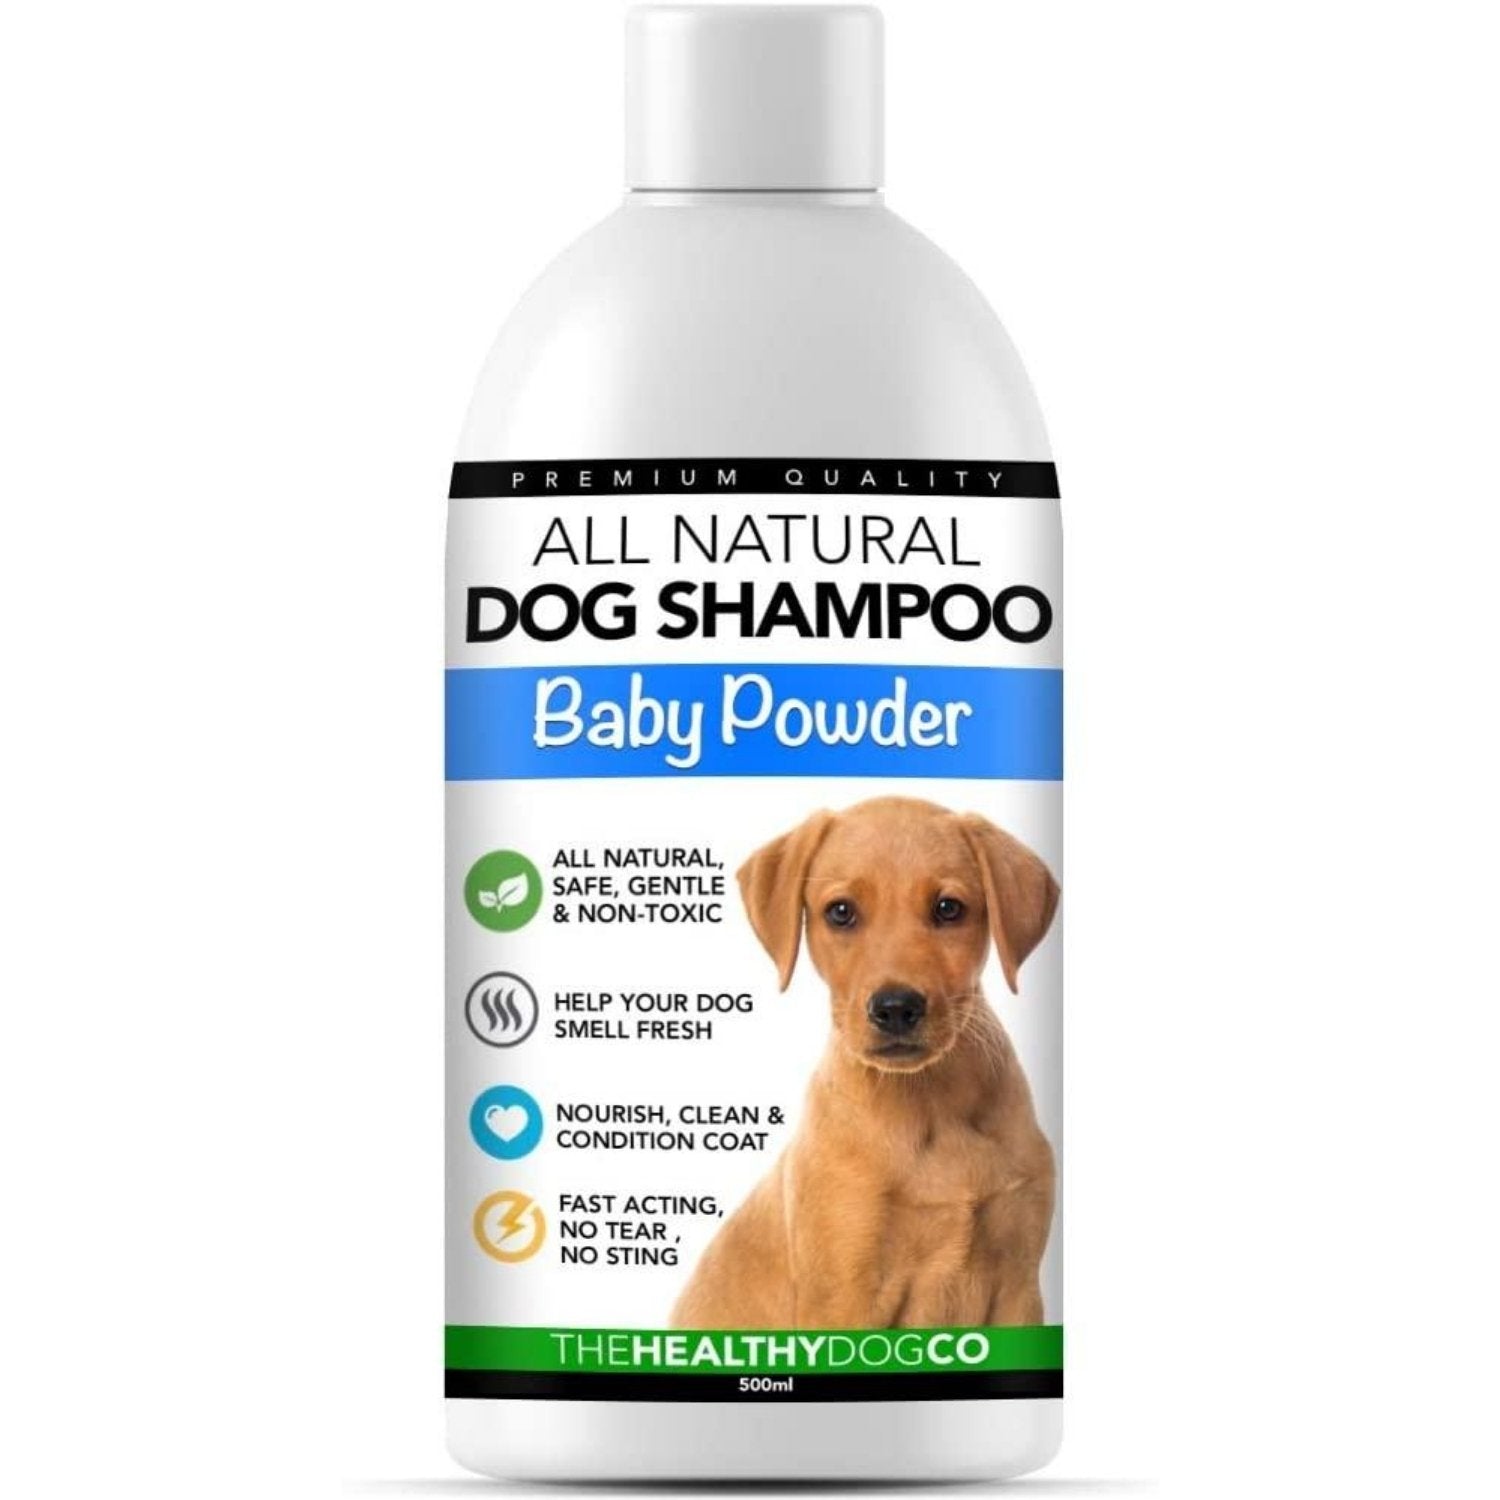 All-Natural Dog Shampoo Baby Powder Scent - The Healthy Dog Co